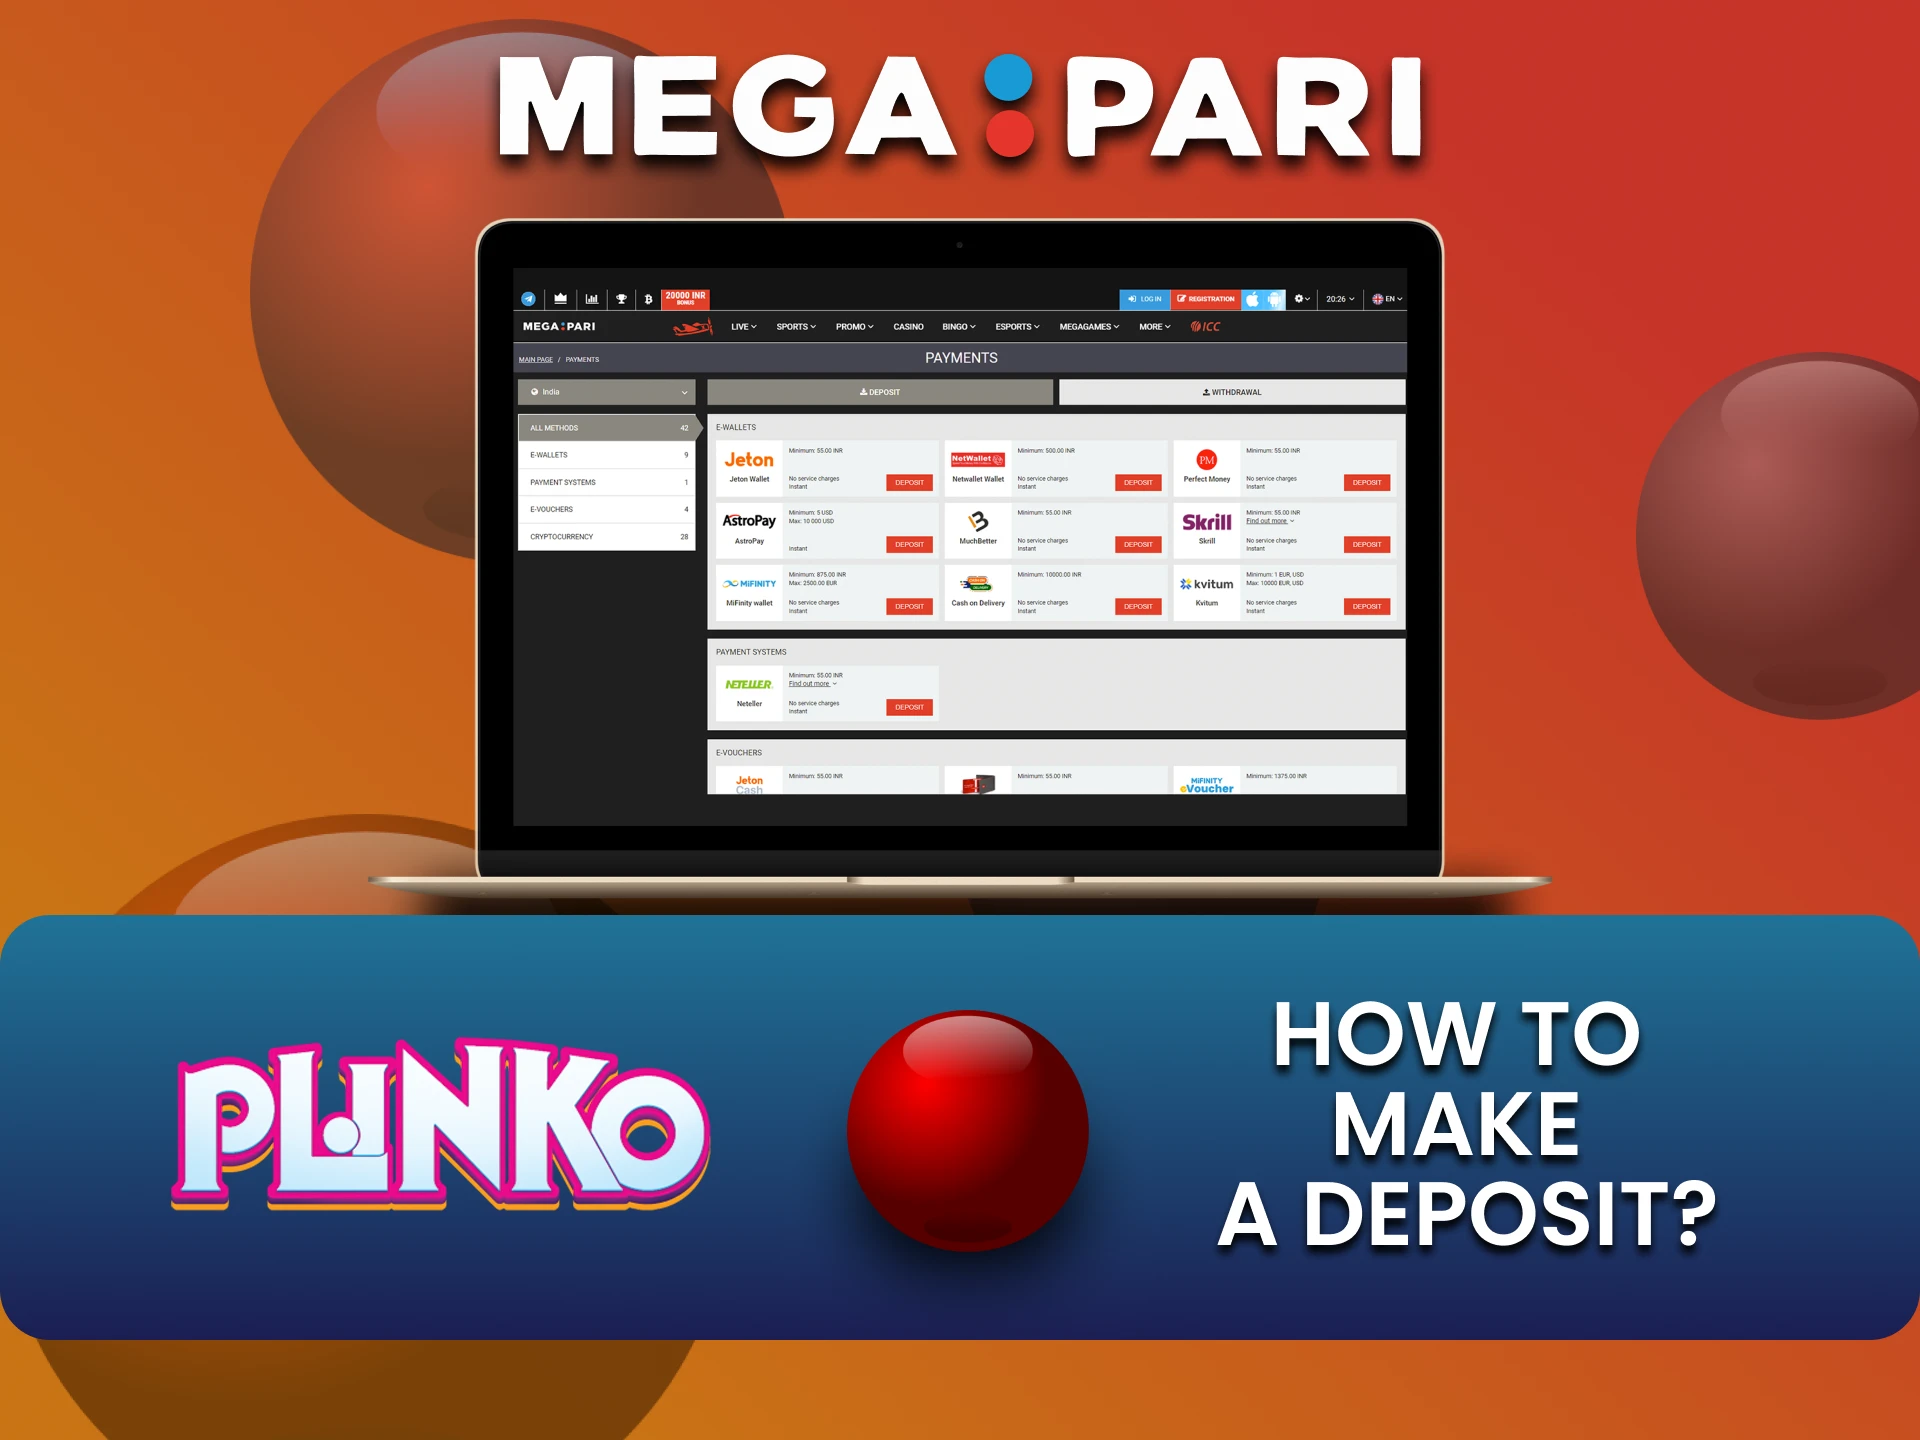 Find out how to deposit funds for Plinko on Megapari.